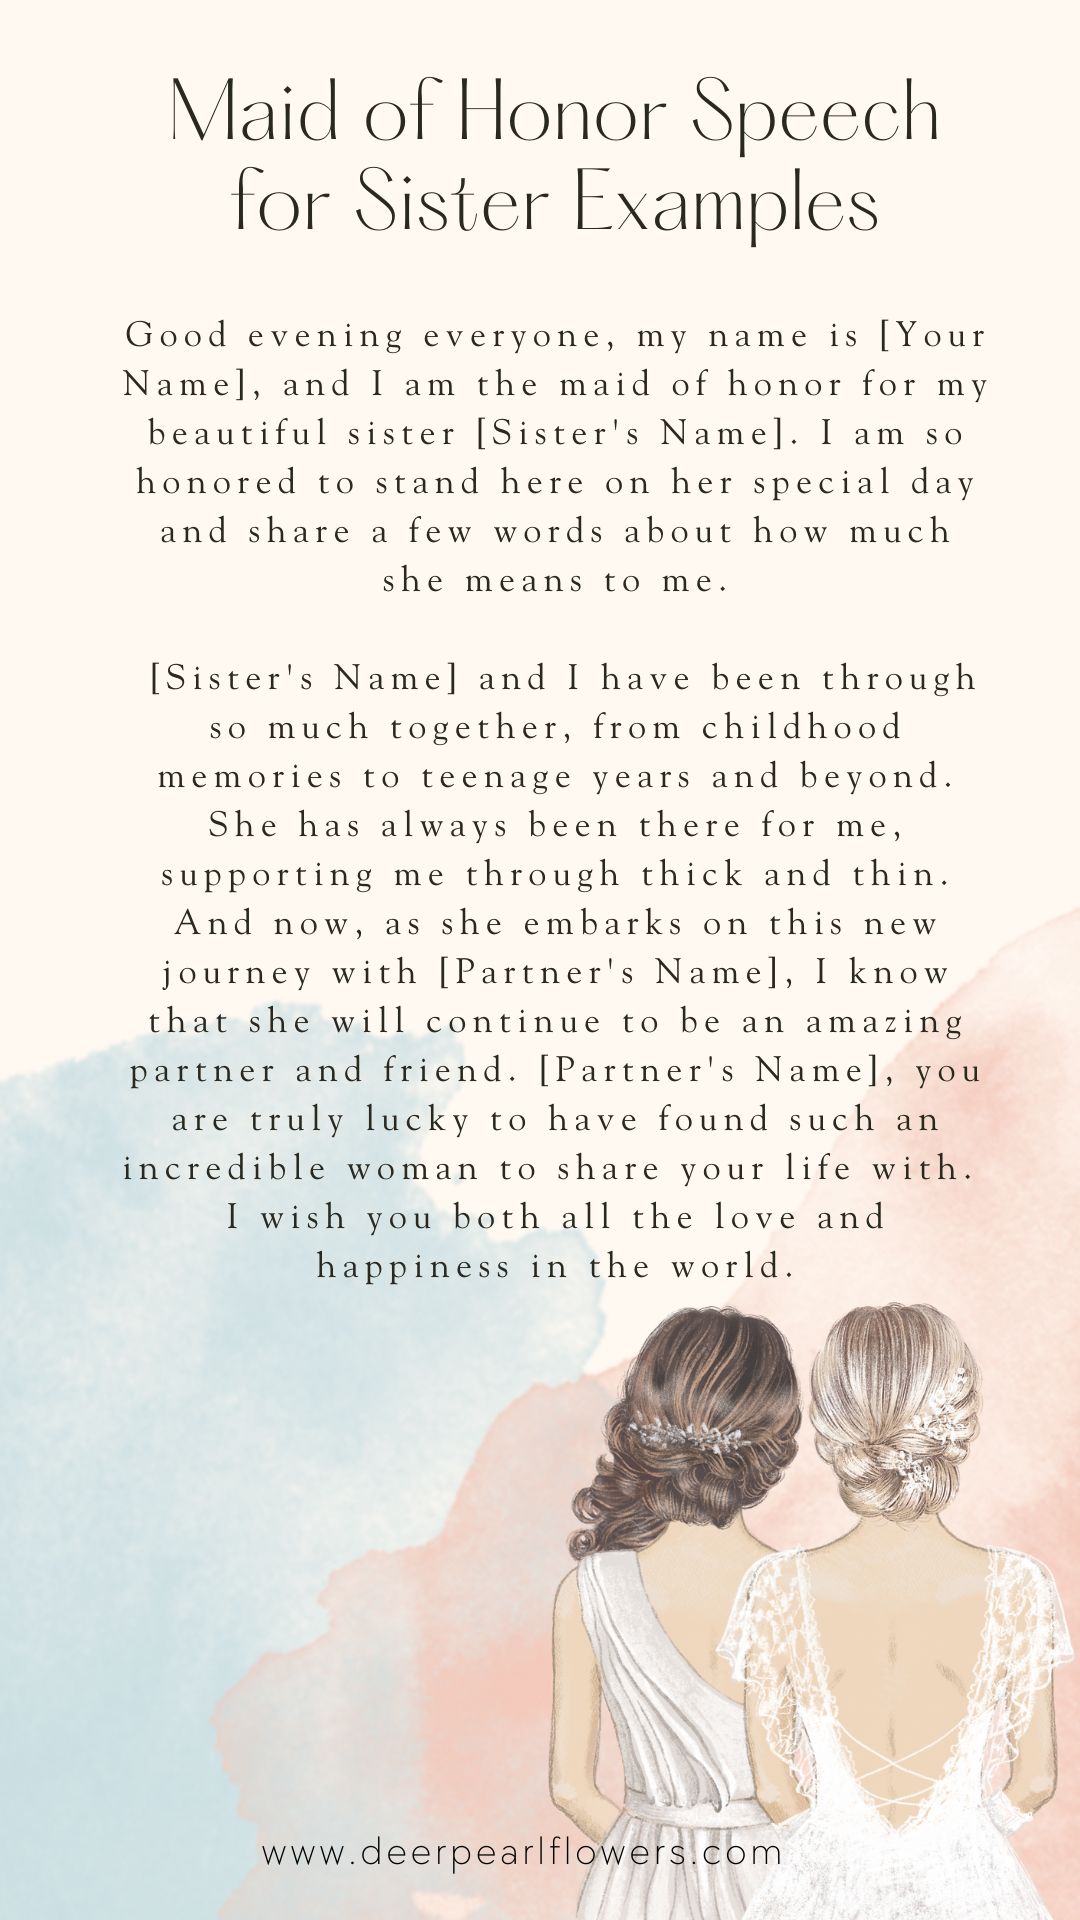 maid of honor speech examples short and sweet